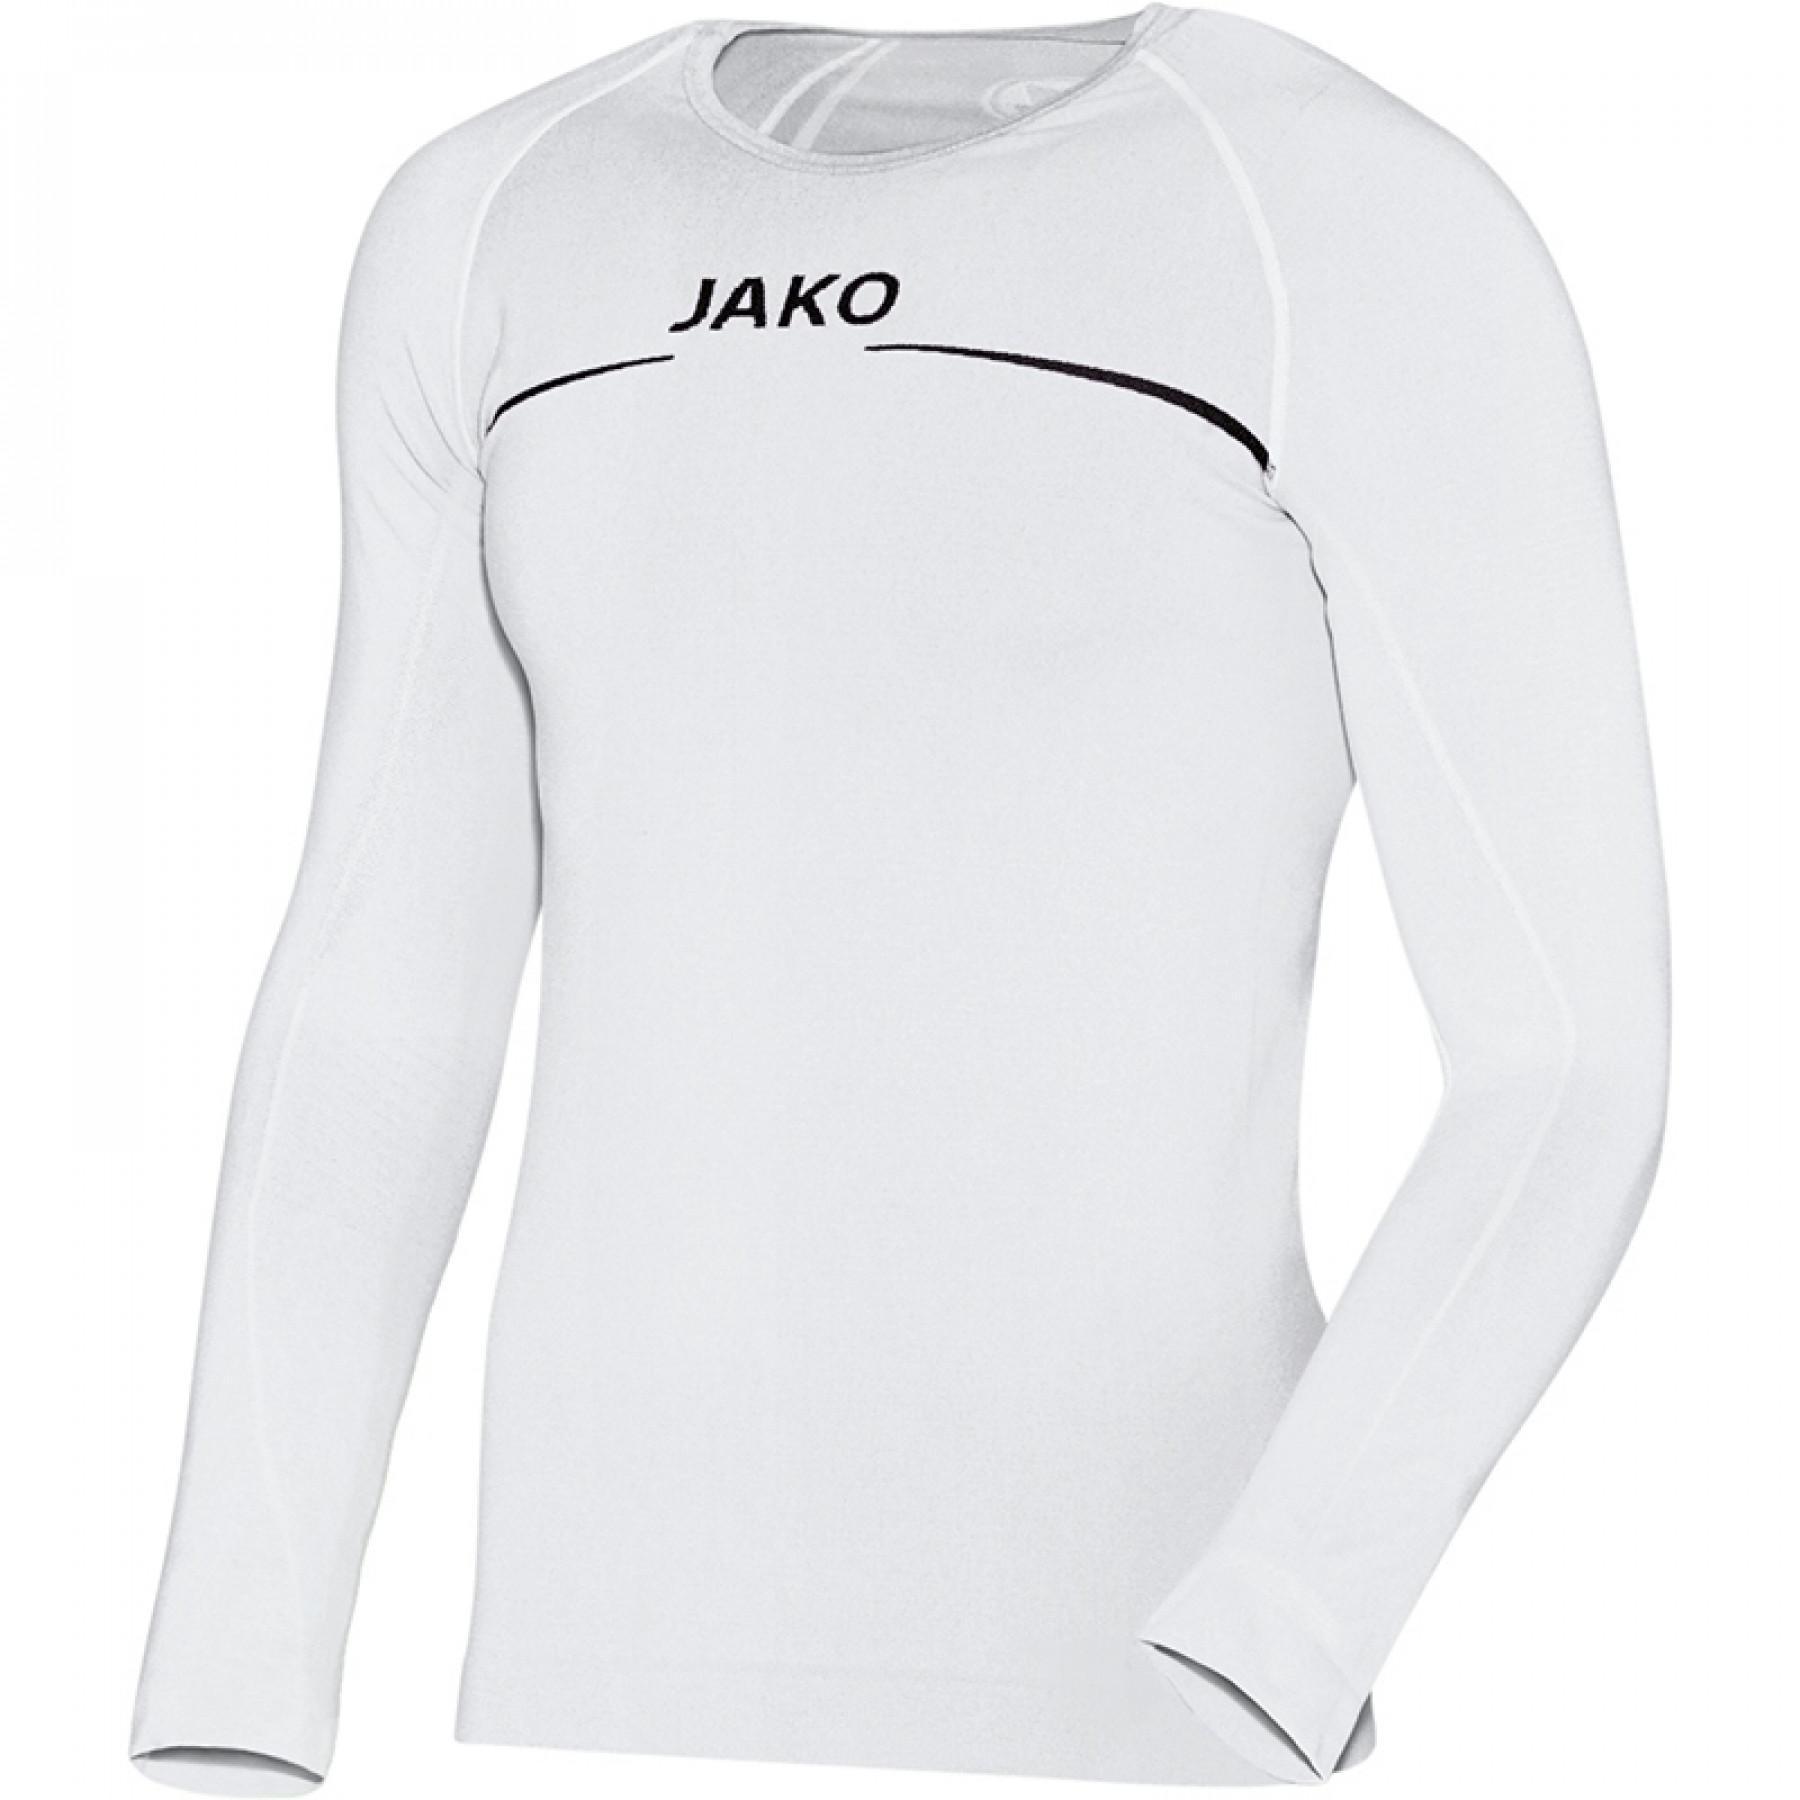 Jersey Jako Comfort manches longues